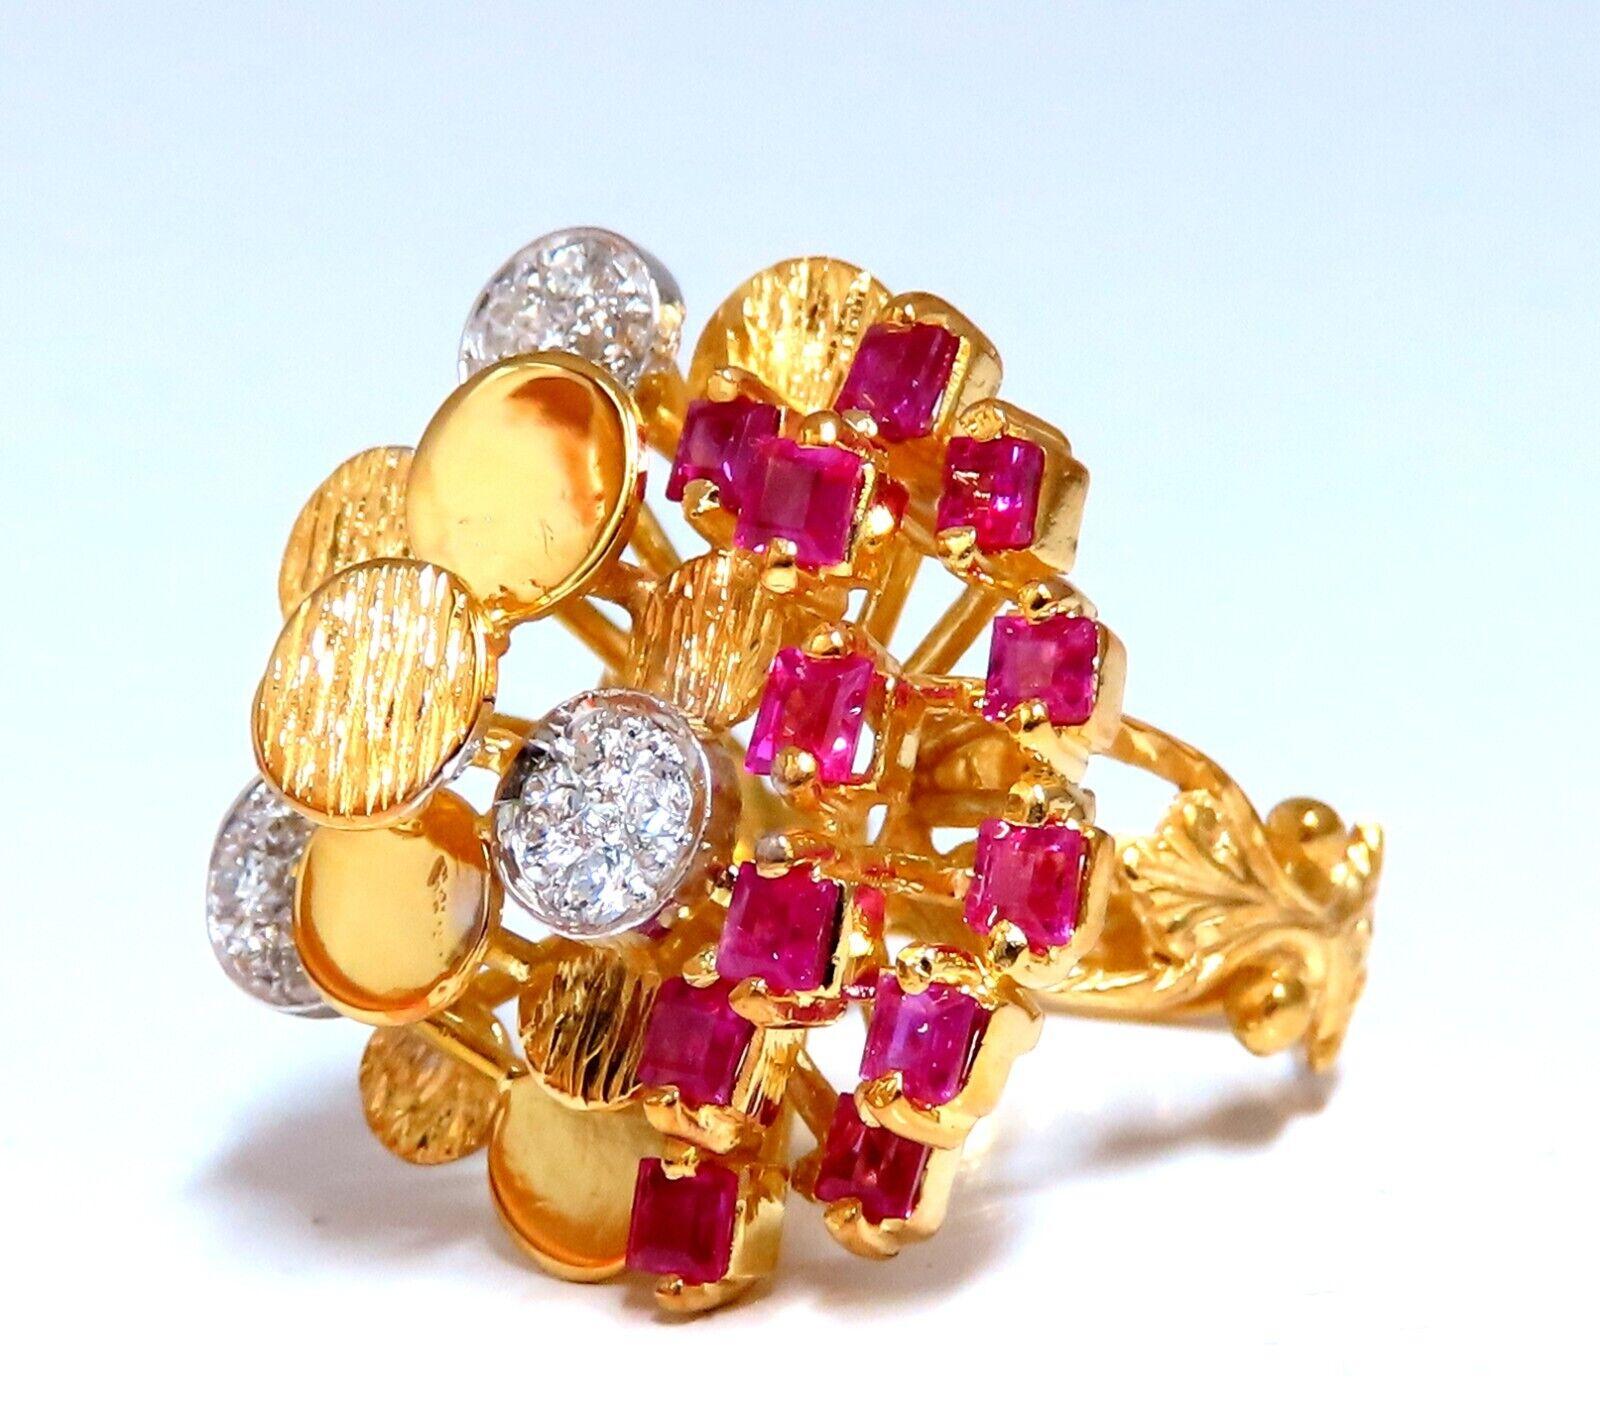 3D Petal Multi-tier cocktail ring

.20ct round diamonds 

G-color vs-2 clarity

1.30ct natural emerald cut shaped rubies

clean clarity, transparent and Pink-red.

  14kt. yellow gold

9.4 grams

Ring Current size: 7.5

depth of ring: 13mm

Deck of